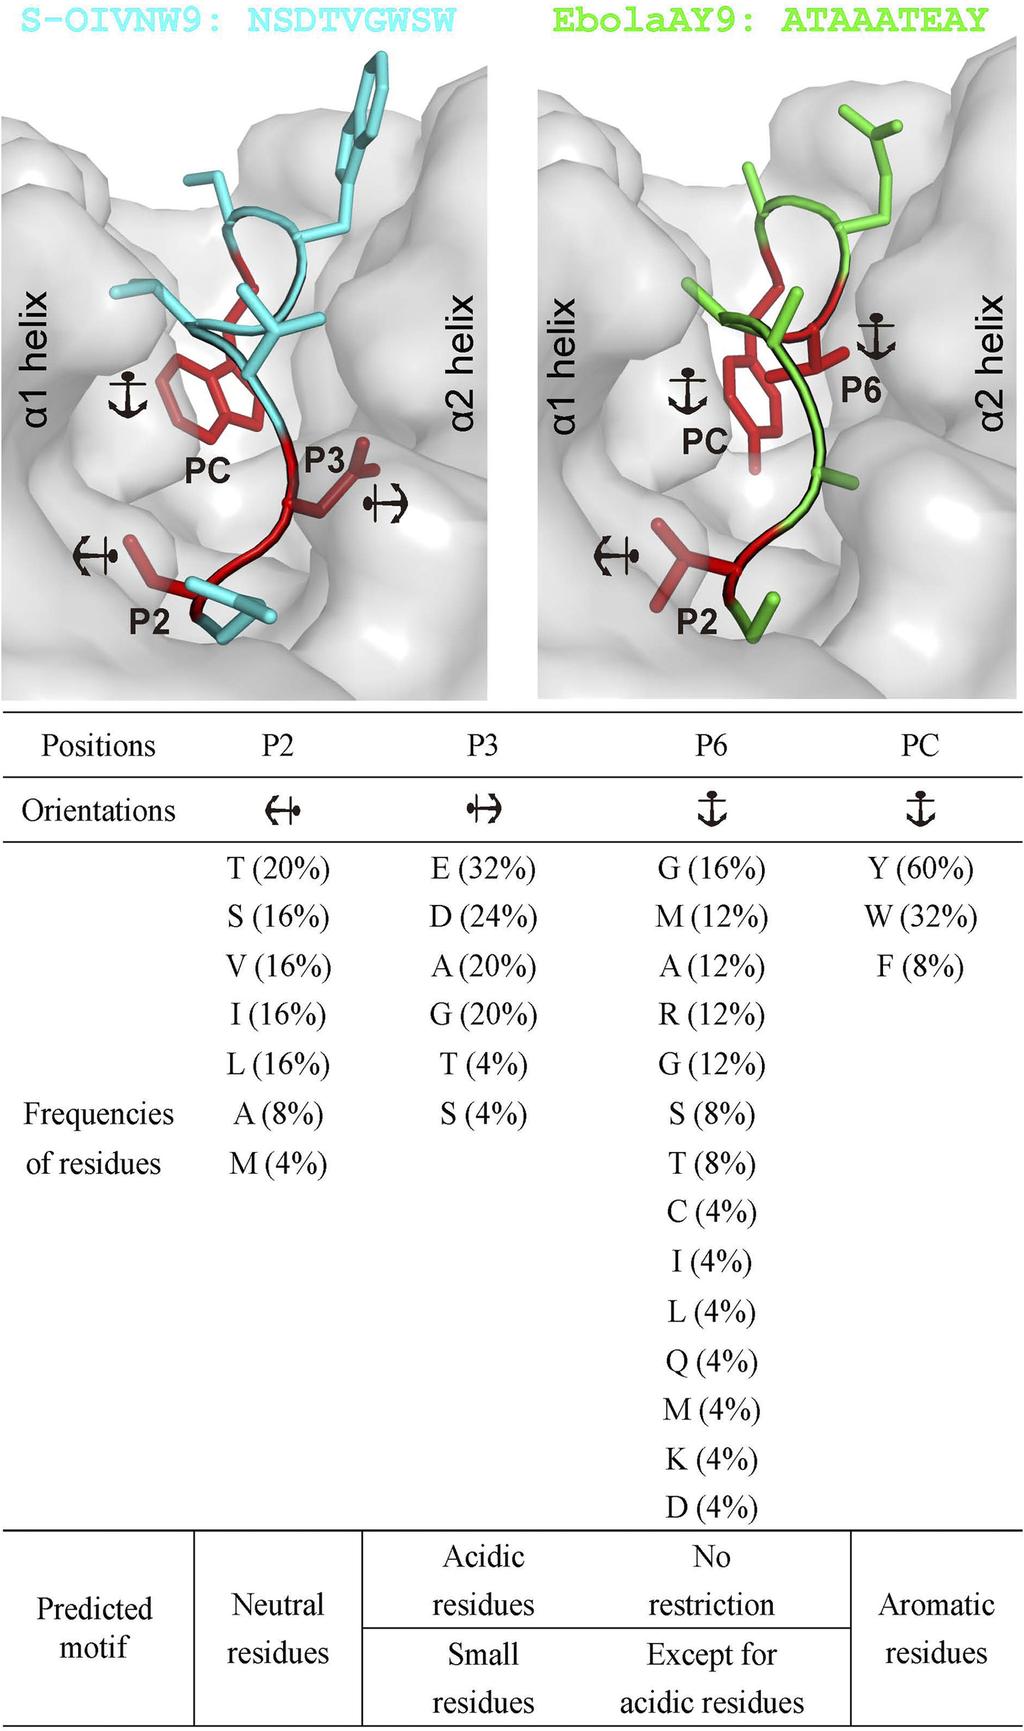 VOL. 85, 2011 SLA I STRUCTURE AND PEPTIDE EPITOPES OF INFLUENZA VIRUS 11721 different thermostabilities of Ebola AY9, S-OIV KY9 and S-OIV MY9 indicate that polar P6 residues which can form hydrogen